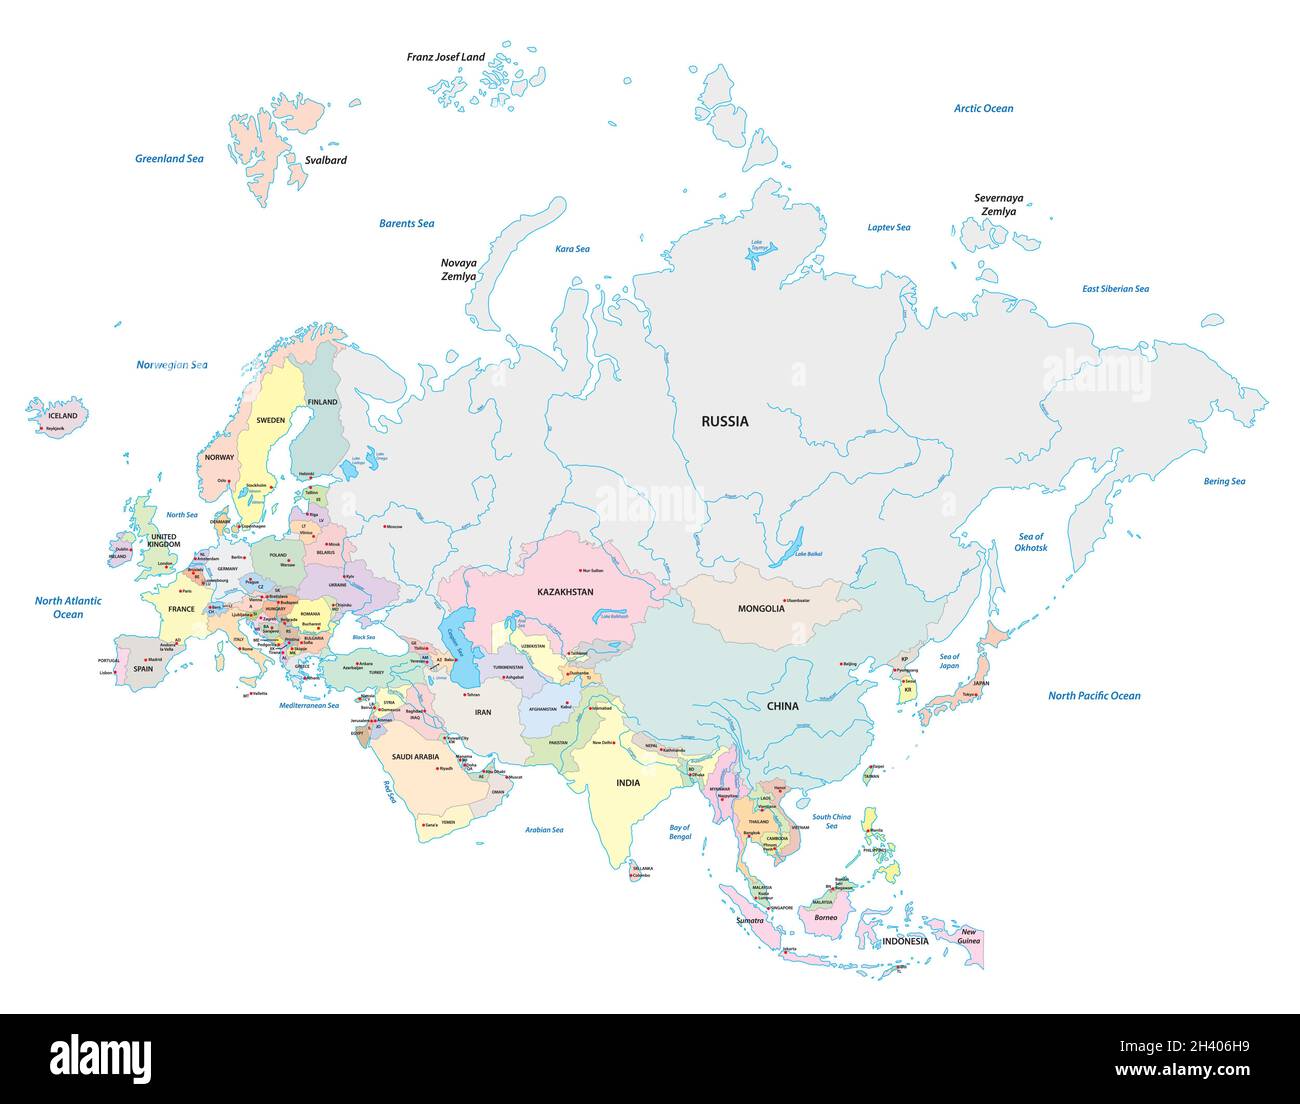 Detailed vector map of the two continents Europe and Asia, Eurasia Stock Vector